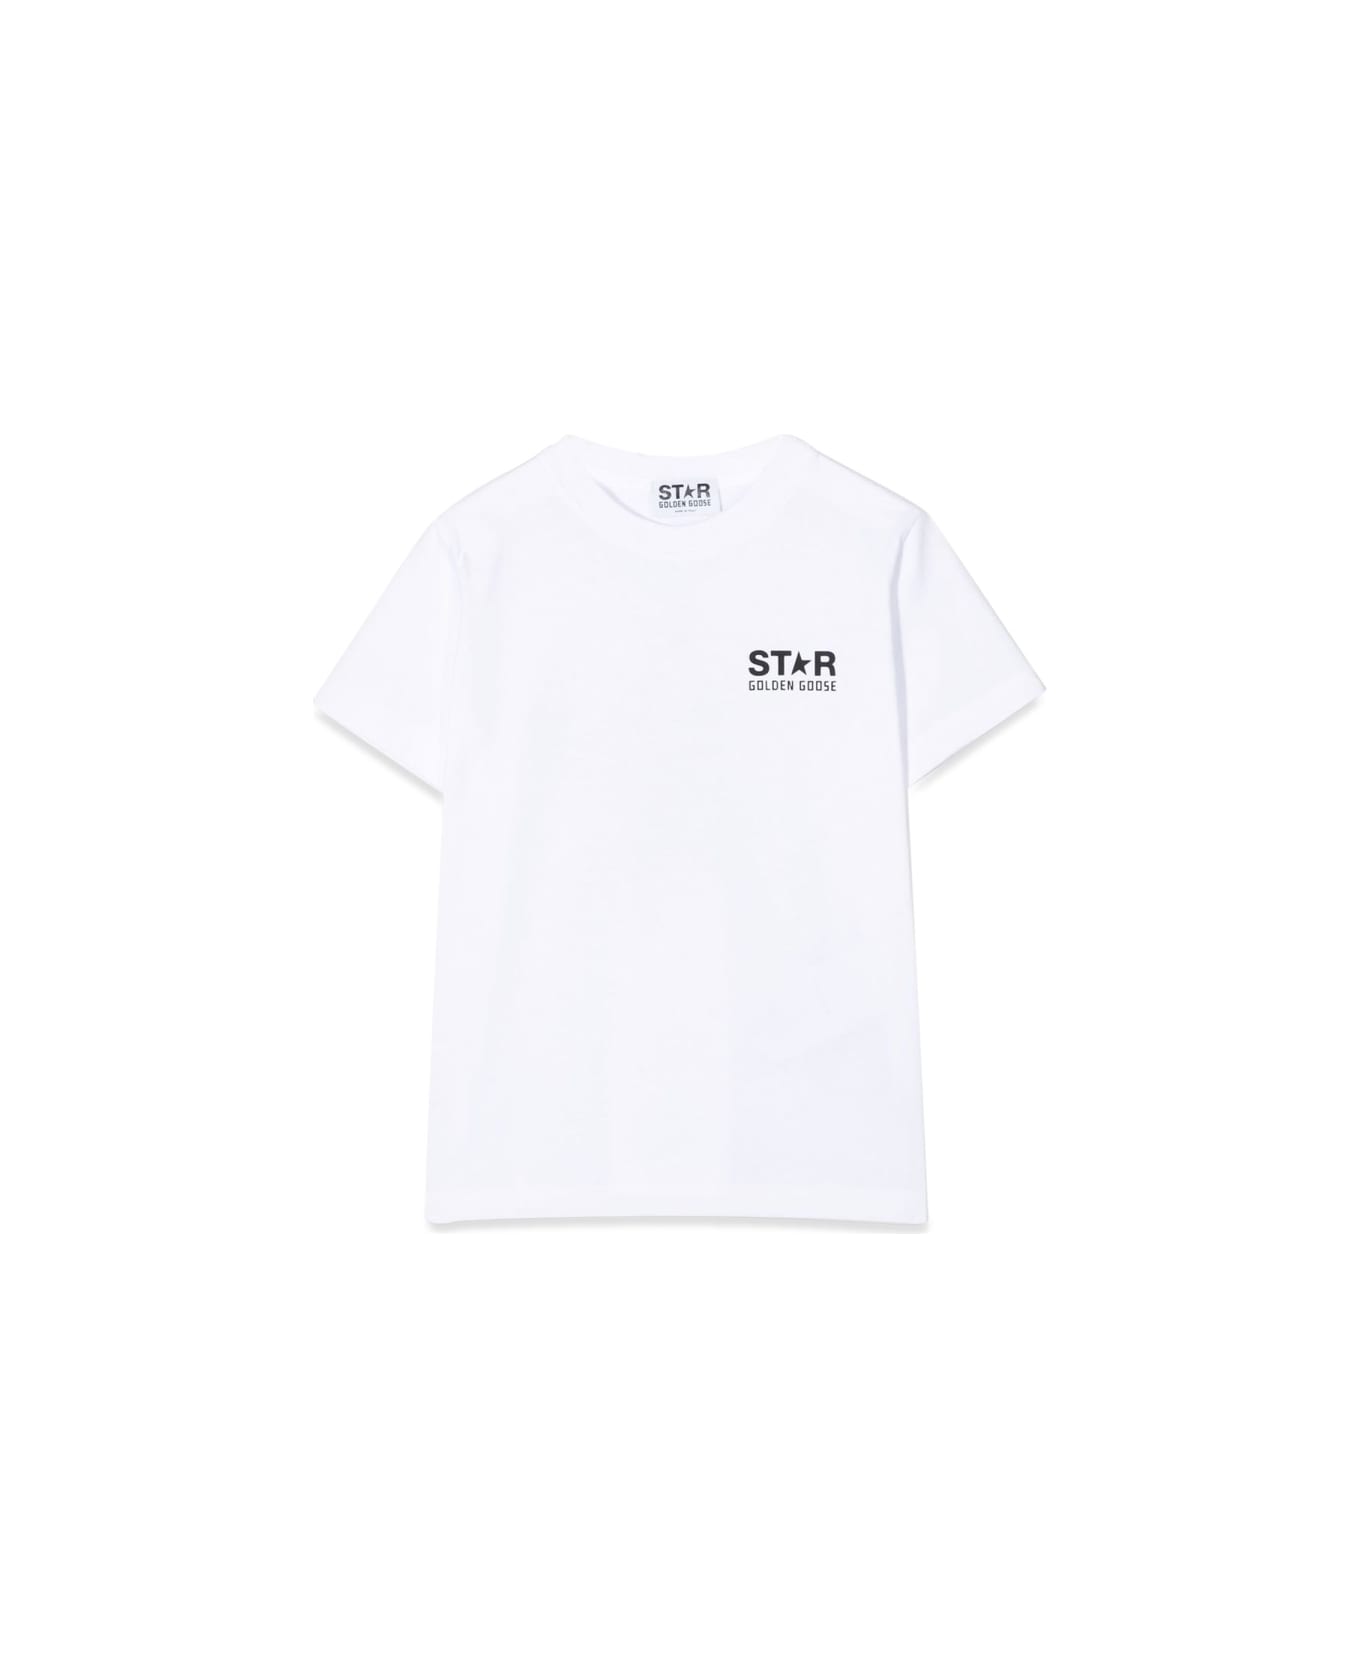 Golden Goose Star T-shirt With Logo - WHITE Tシャツ＆ポロシャツ